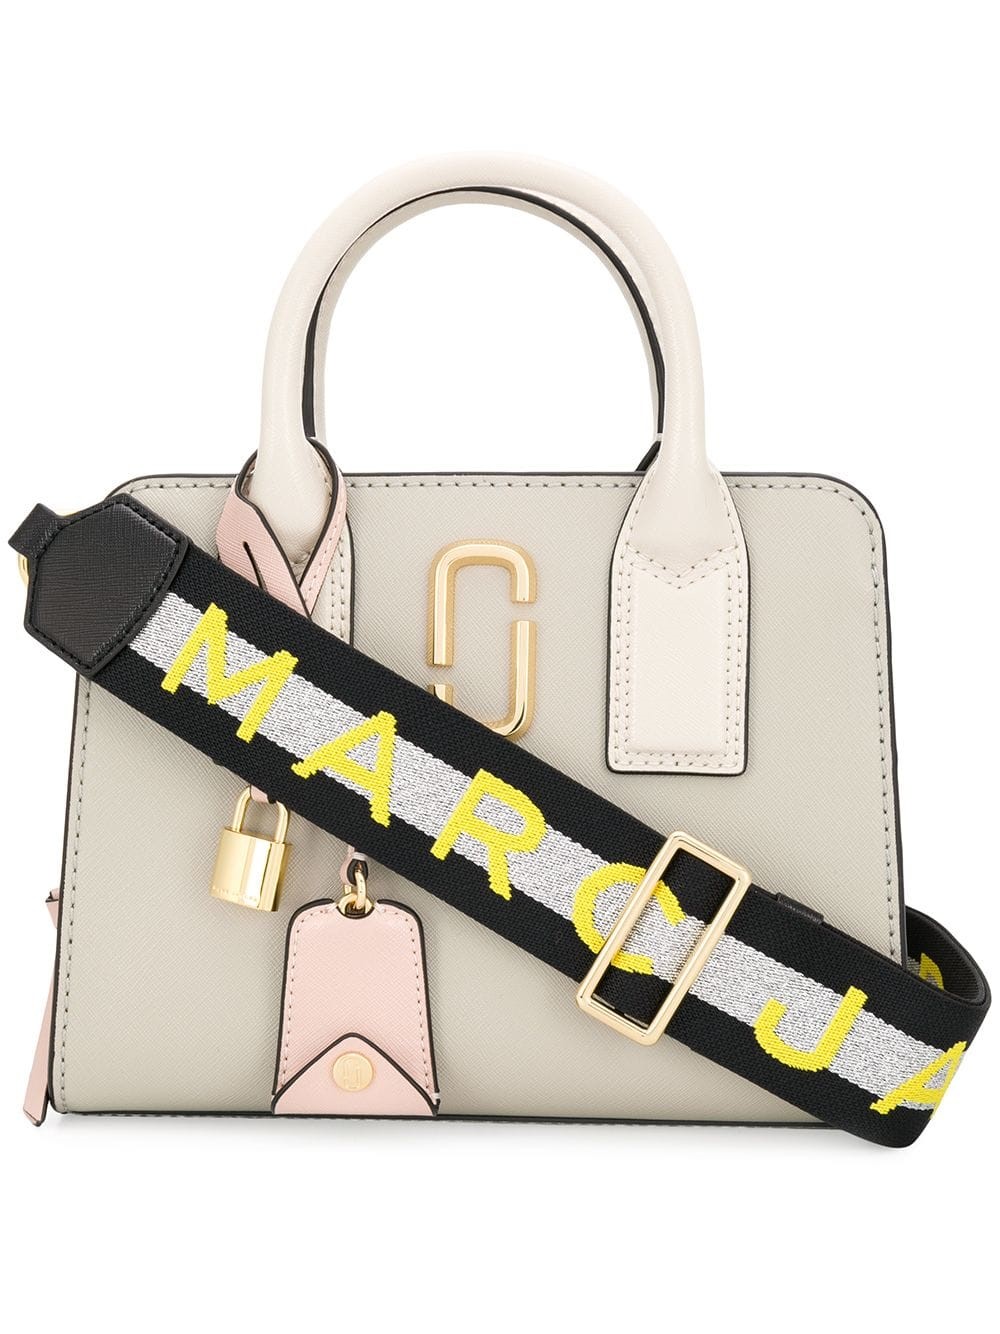 marc jacobs TOTE BAG WITH STRAP available on 0 - 25484